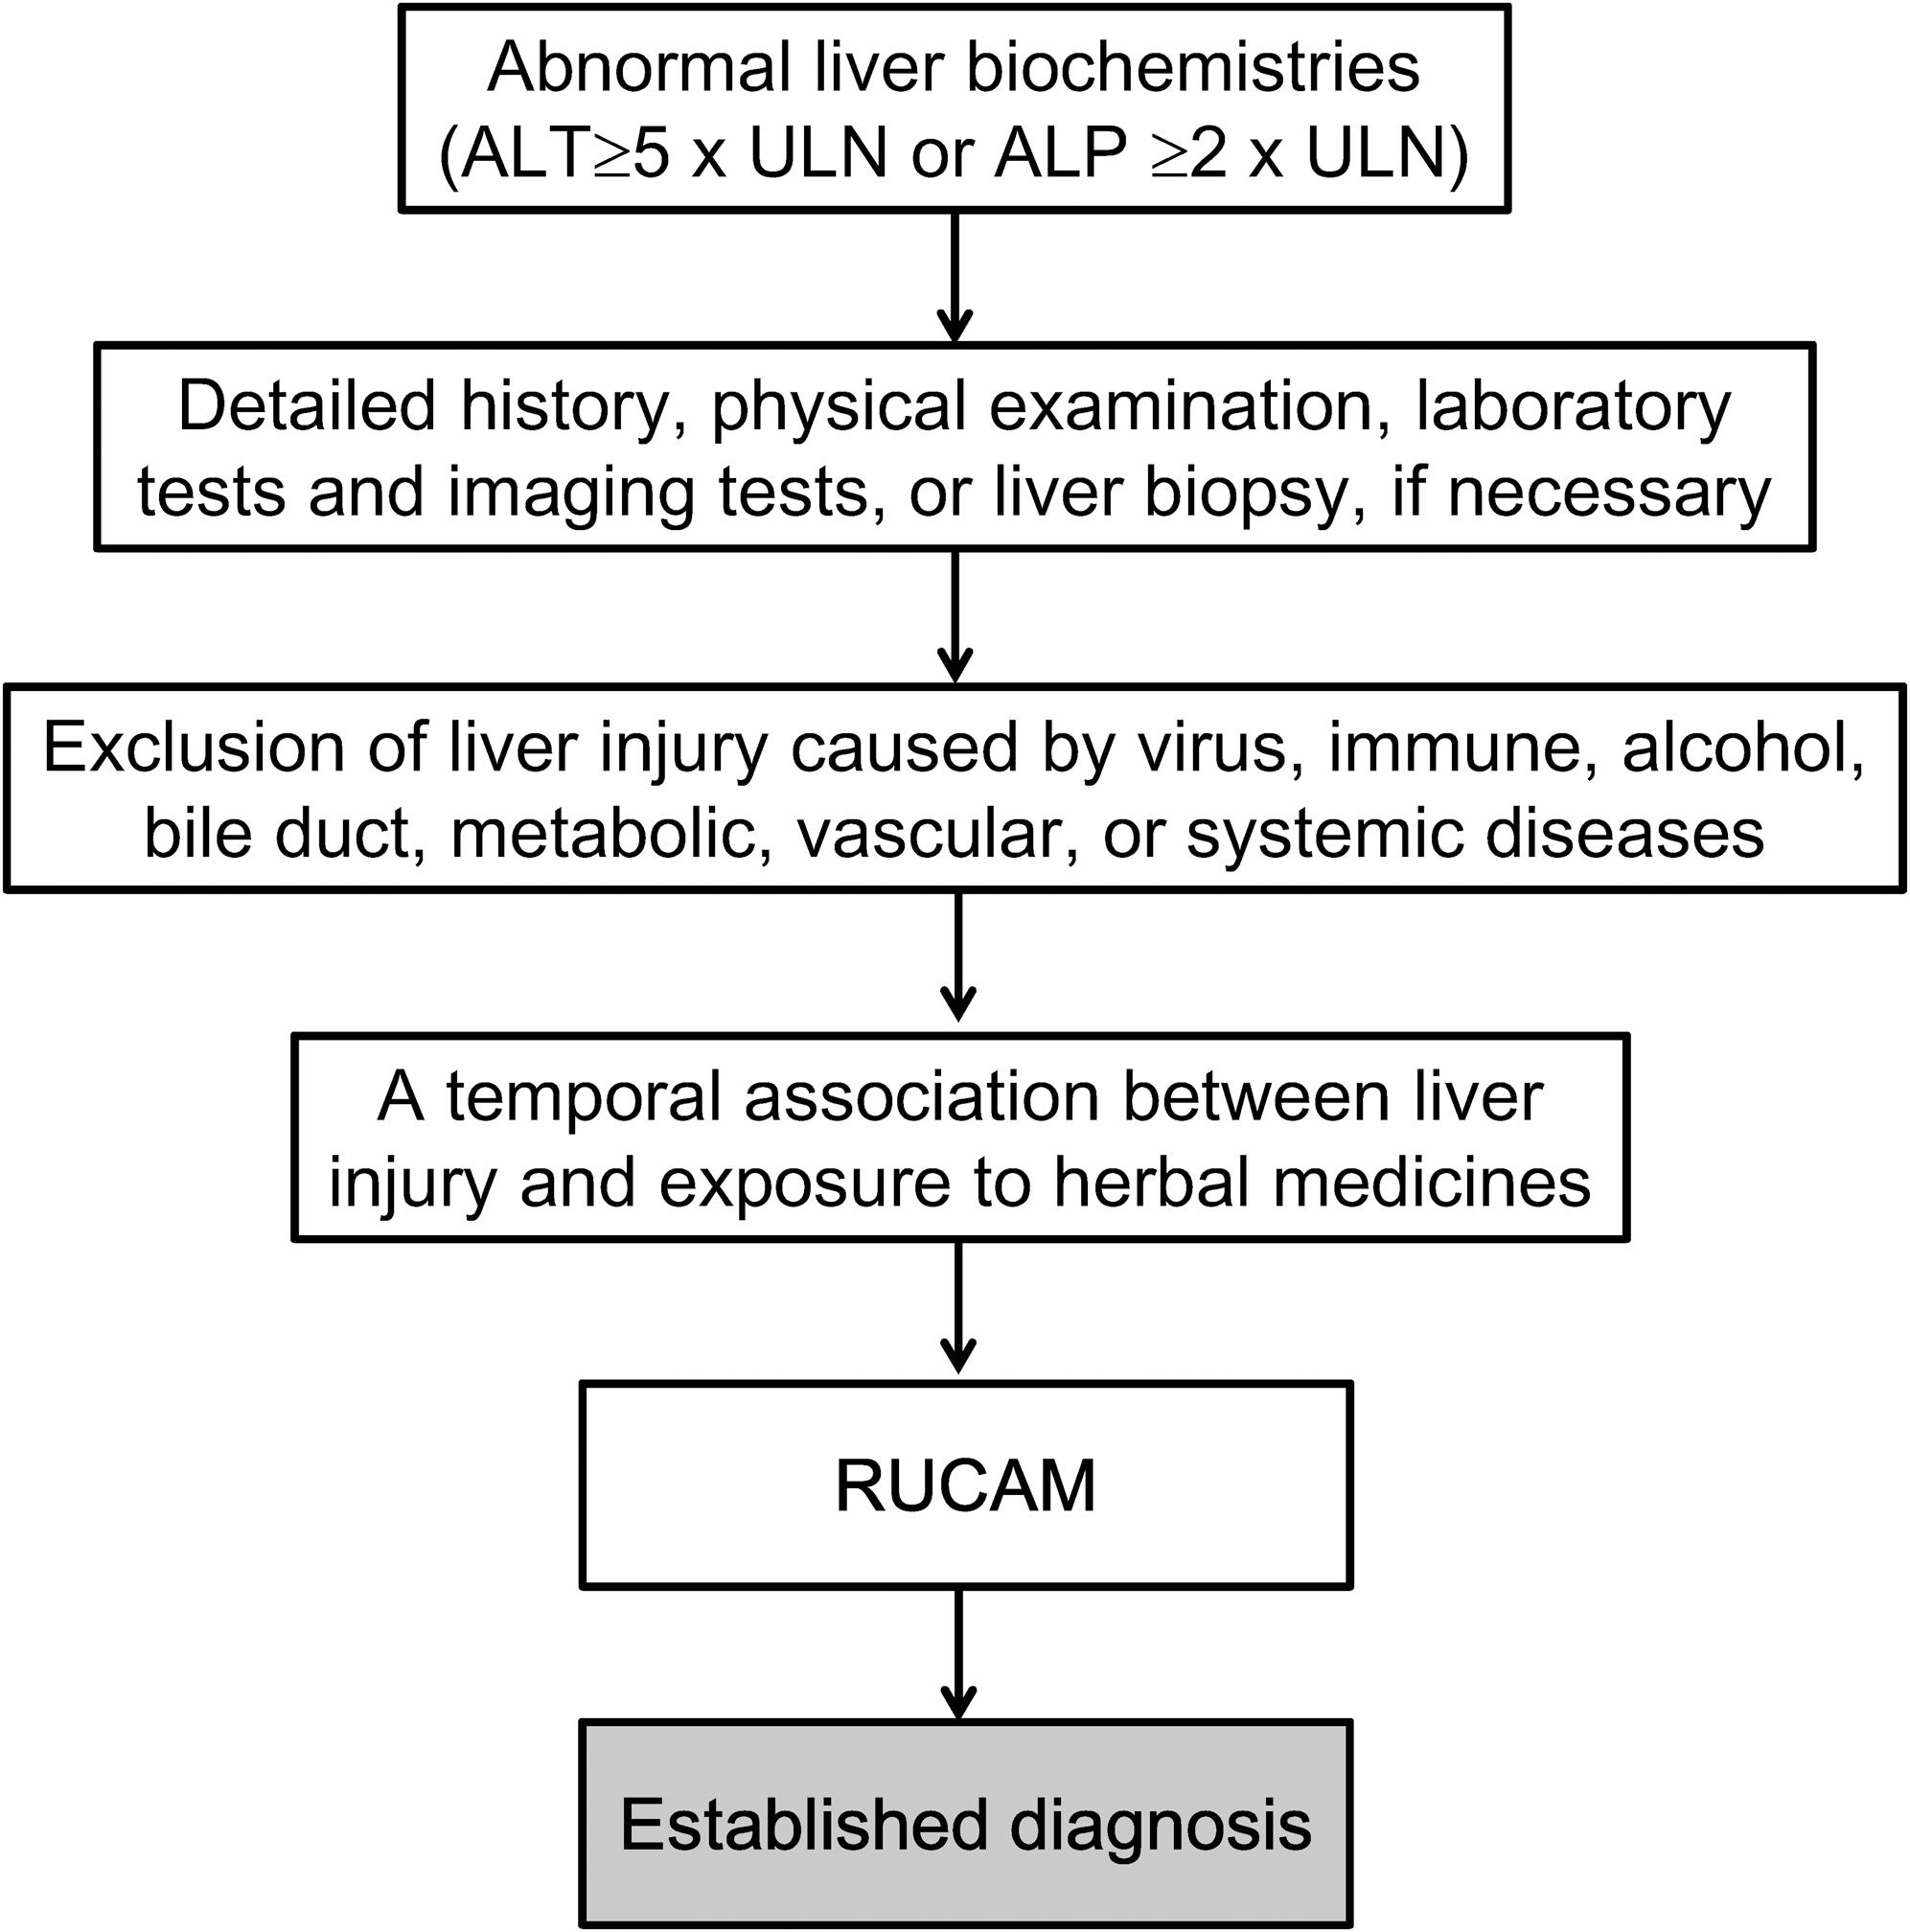 <bold>Flowchart depicting the diagnosis strategy of herb induced liver injury, adapted from the Chinese guidelines for the diagnosis and management of herb-induced liver injury.</bold>Abbreviations: ALP, alkaline phosphatase; ALT, alanine aminotransferase; RUCAM, Roussel Uclaf Causality Assessment Method; ULN, upper limit of normal.